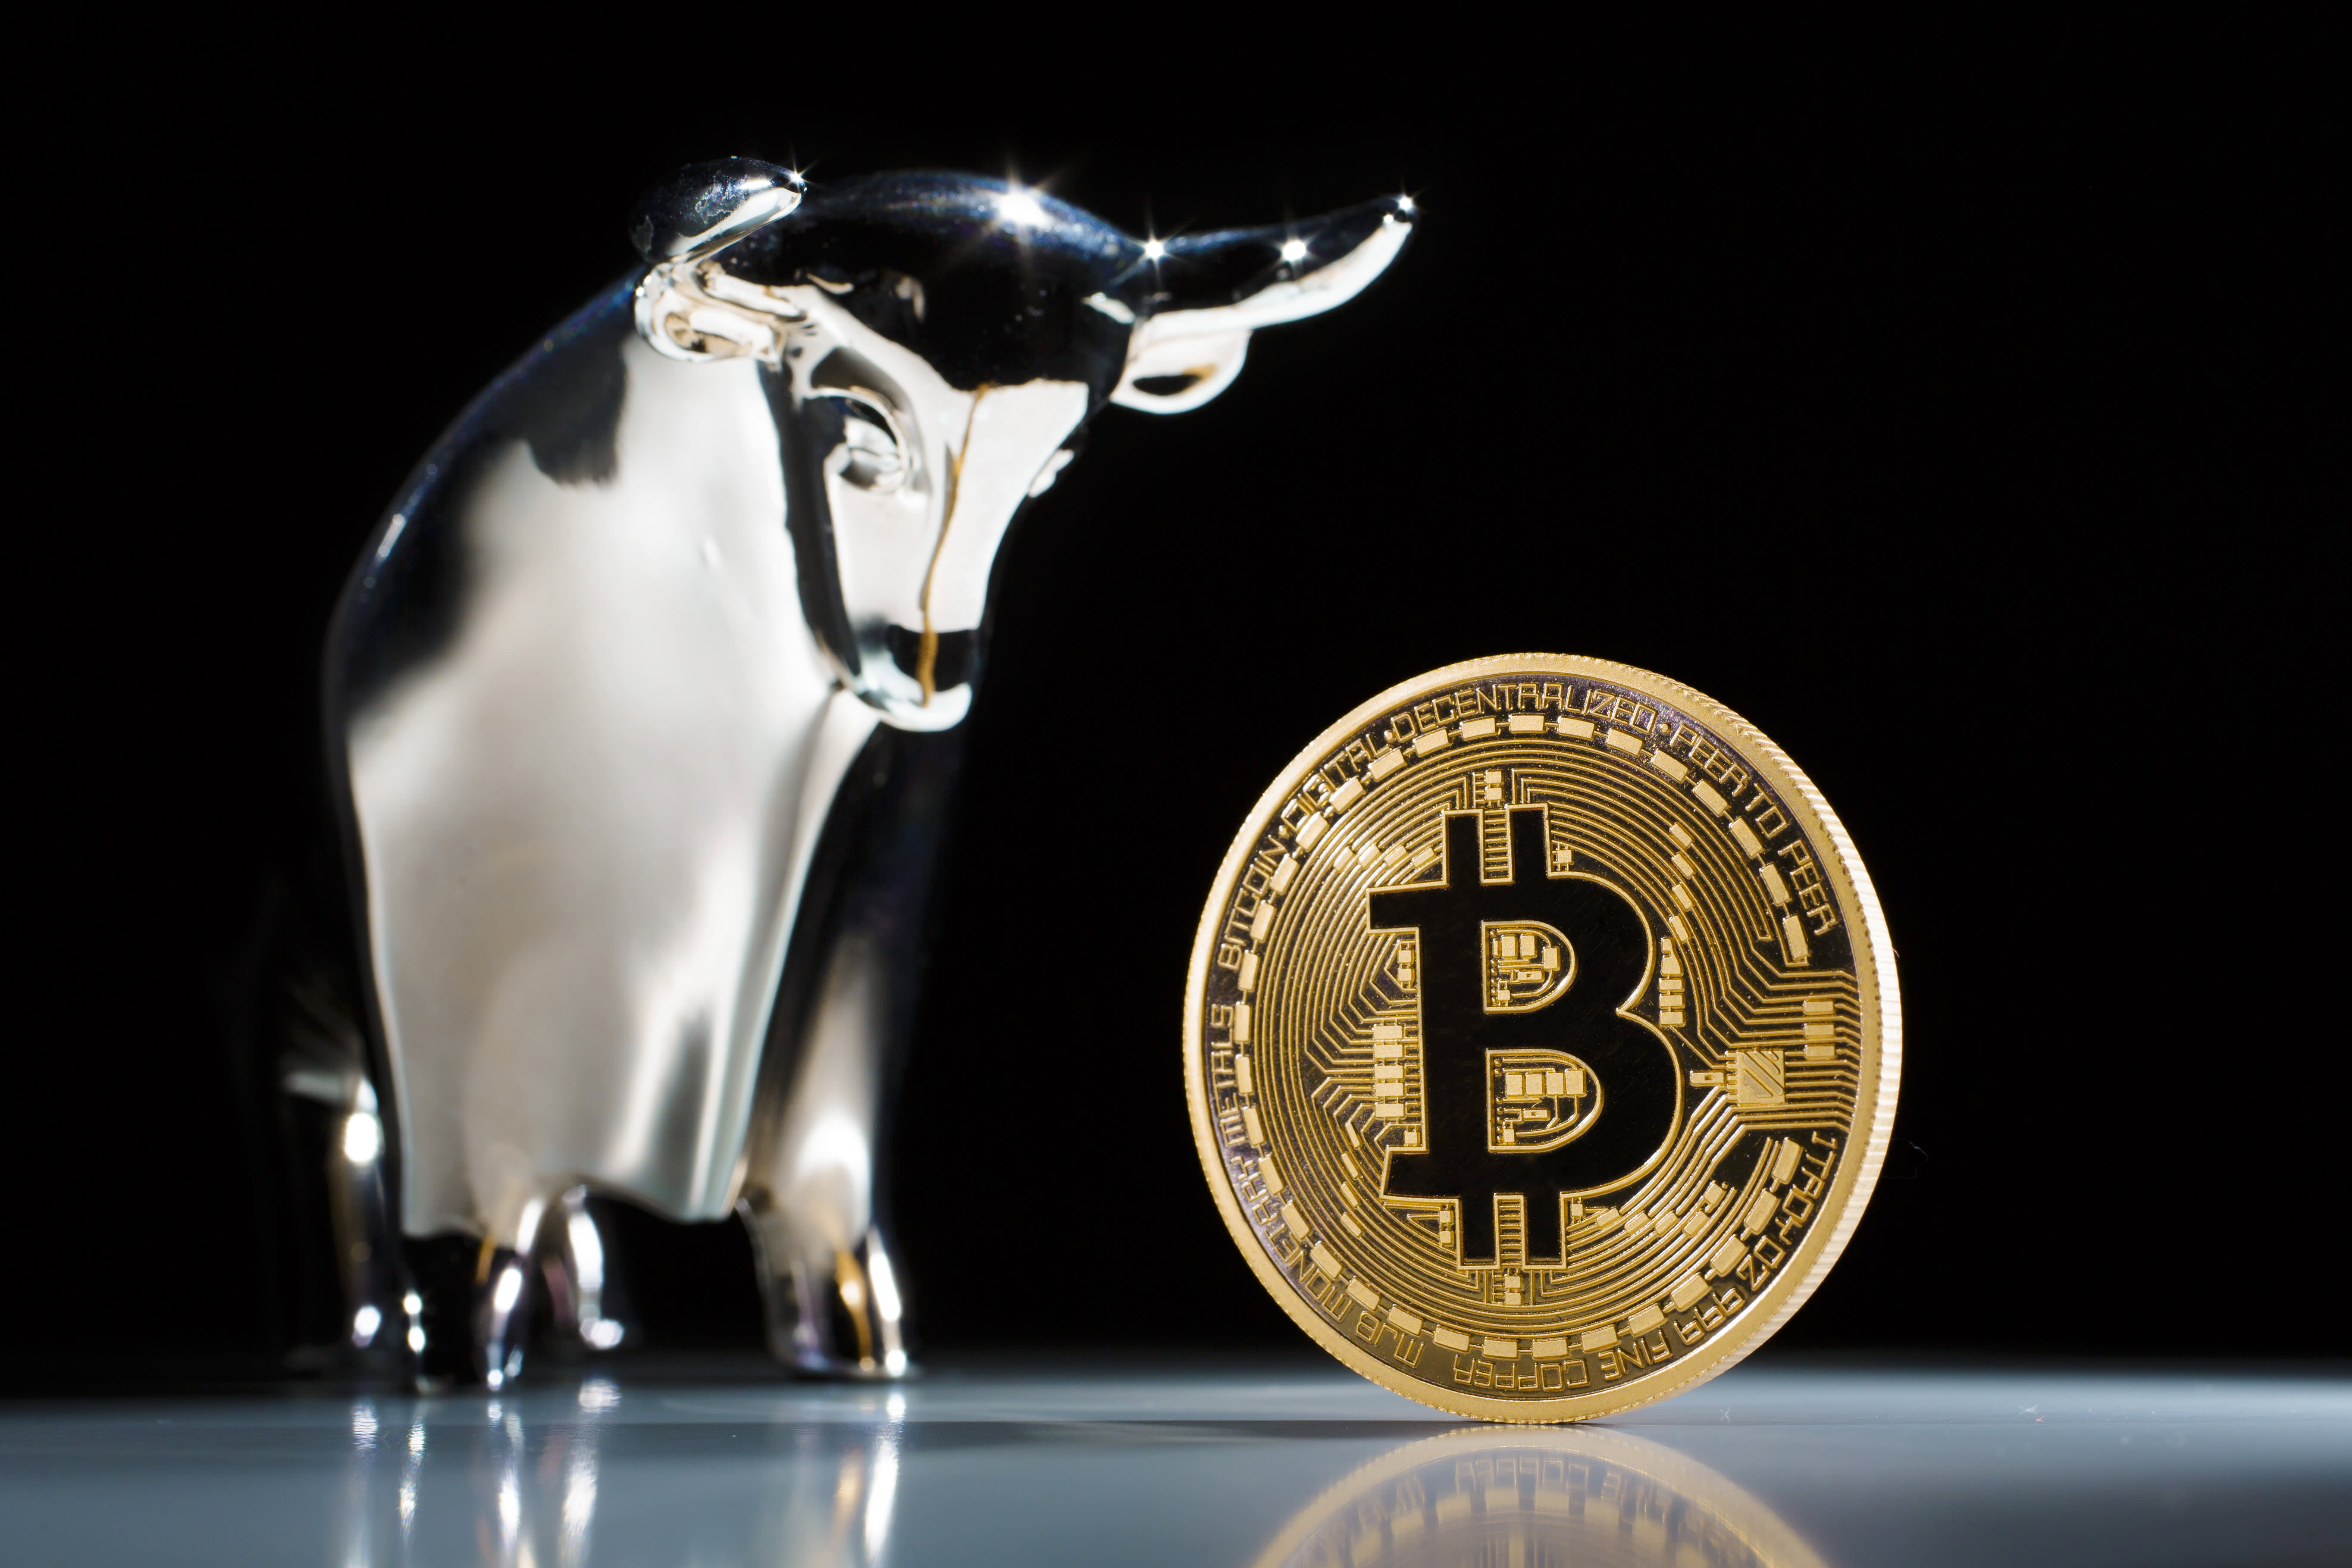 Bitcoin briefly rises above $24,000, extending its new yr rally